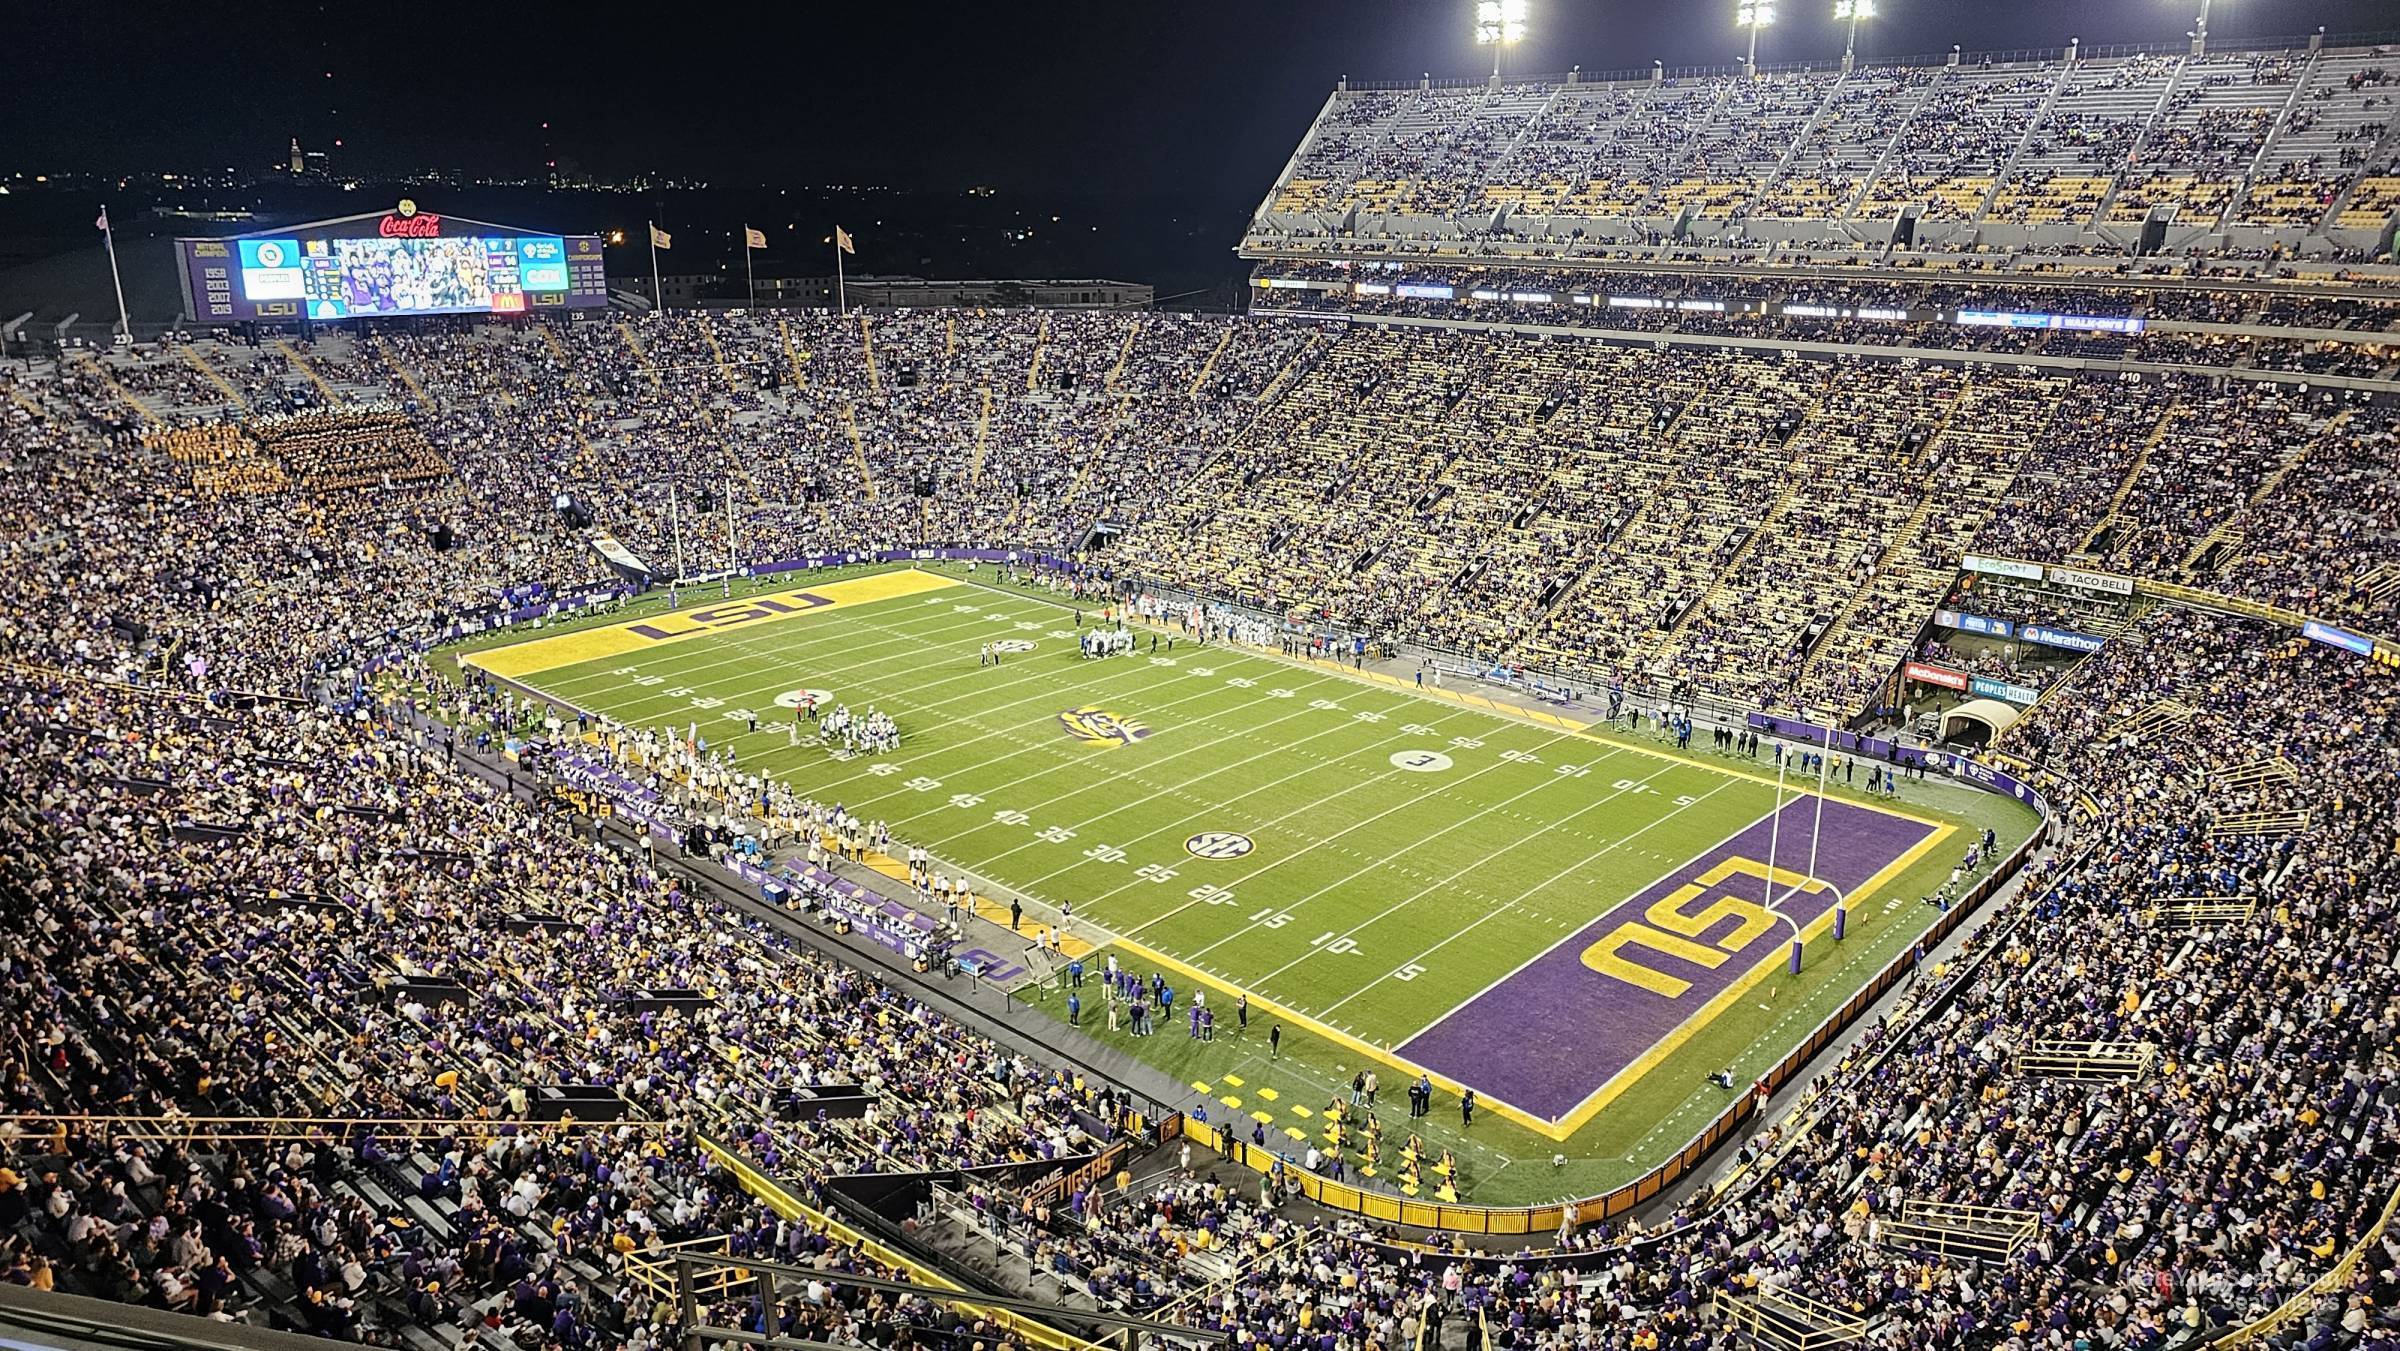 section 510, row 4 seat view  - tiger stadium